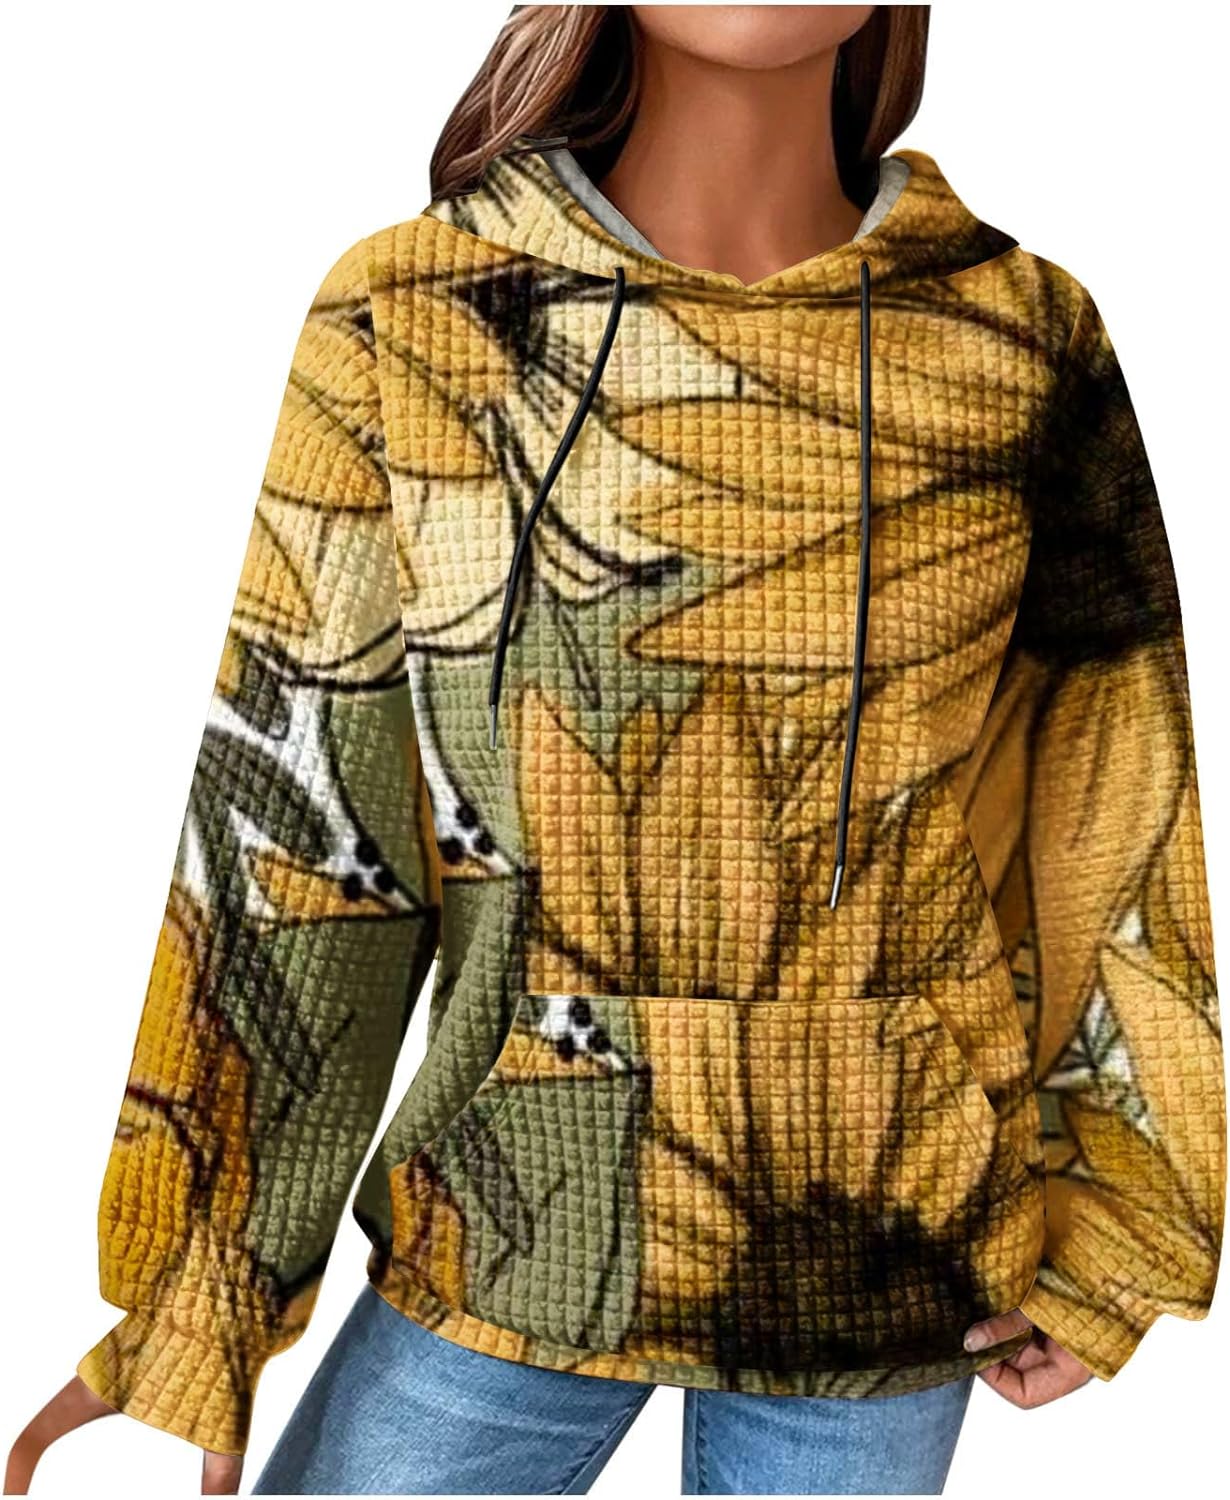 Womens Fashion Quilted Knit Hoodies Floral Print Hooded Sweatshirts Loose Long Sleeve Pullover Tops with Pocket